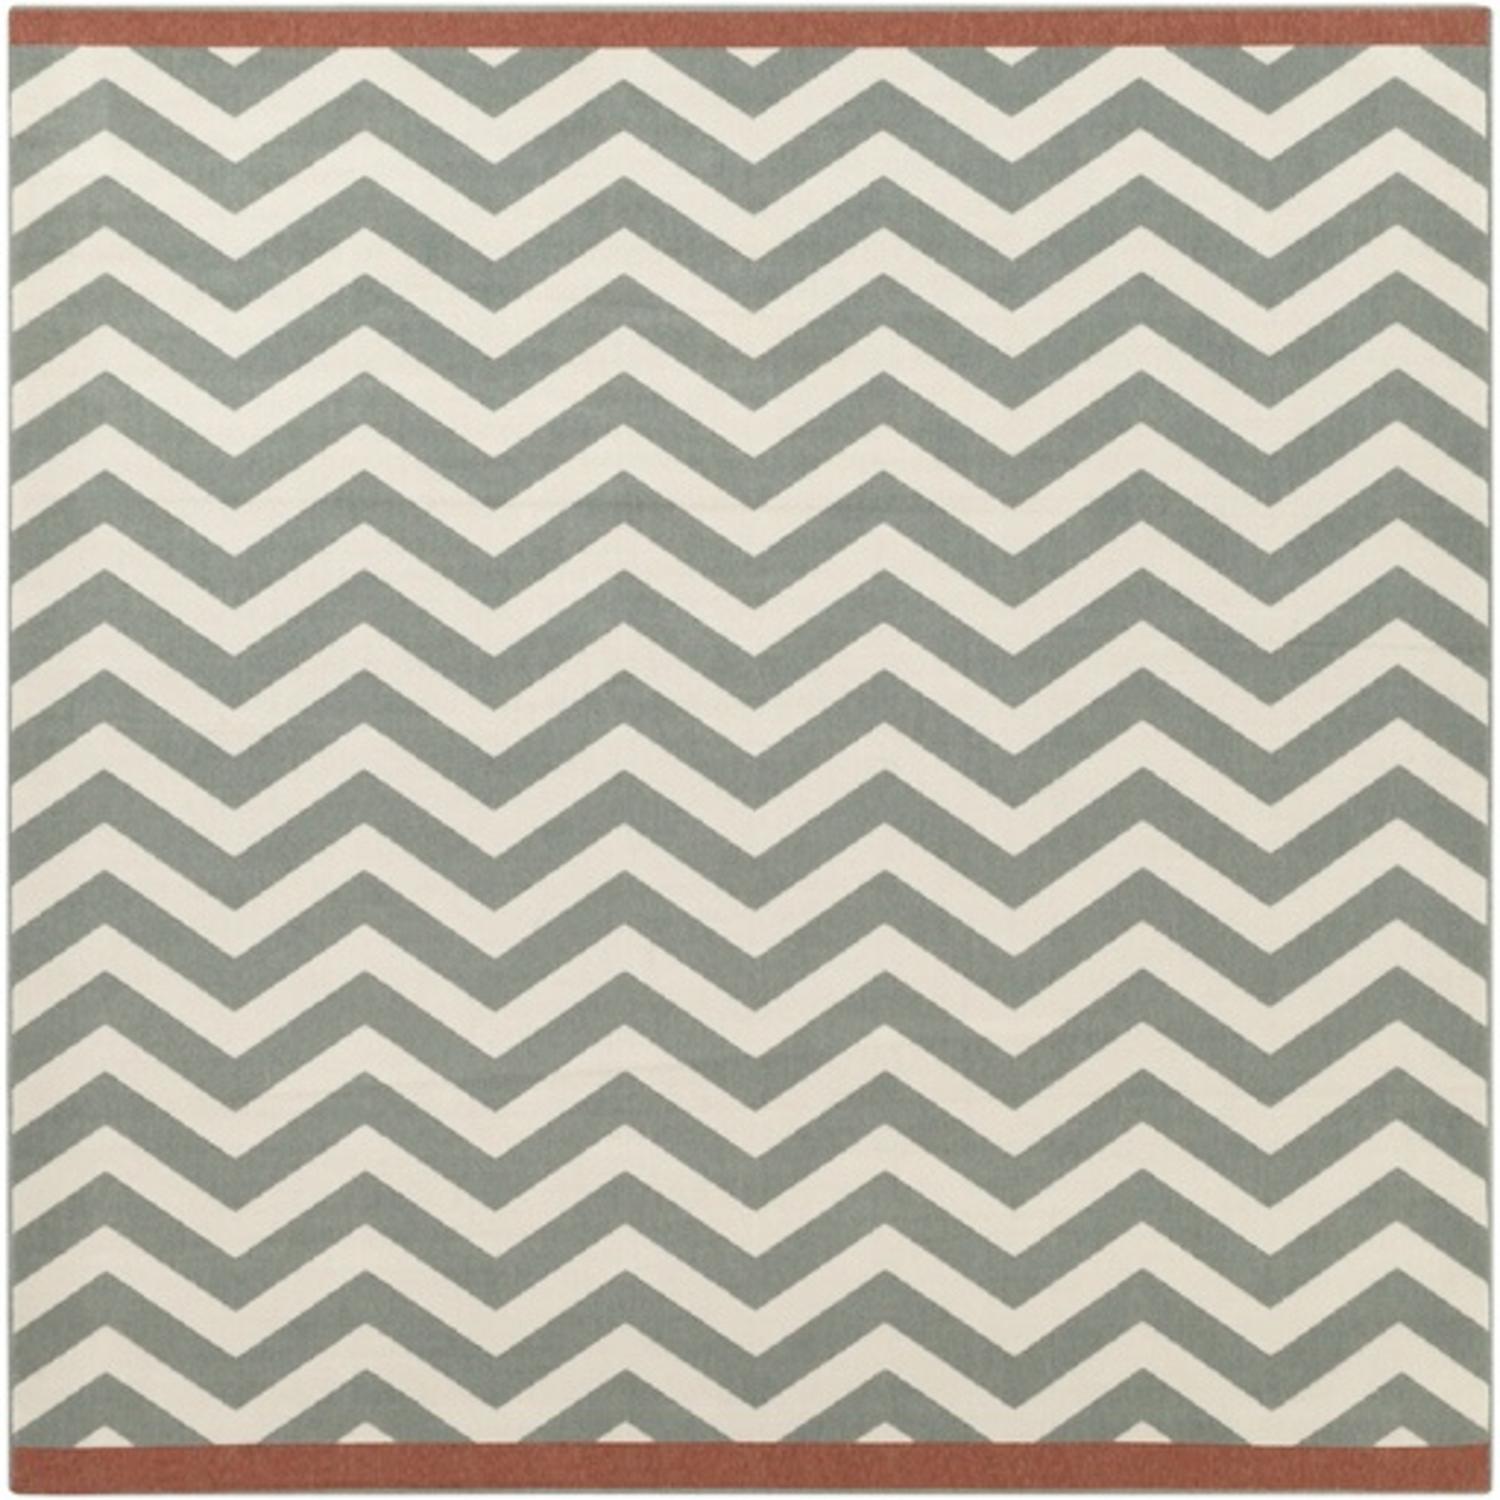 Diva At Home 8.75' x 8.75' Classic Chevrons Mossy Stone Gray and Pearl Ivory Shed-Free Square Area Throw Rug